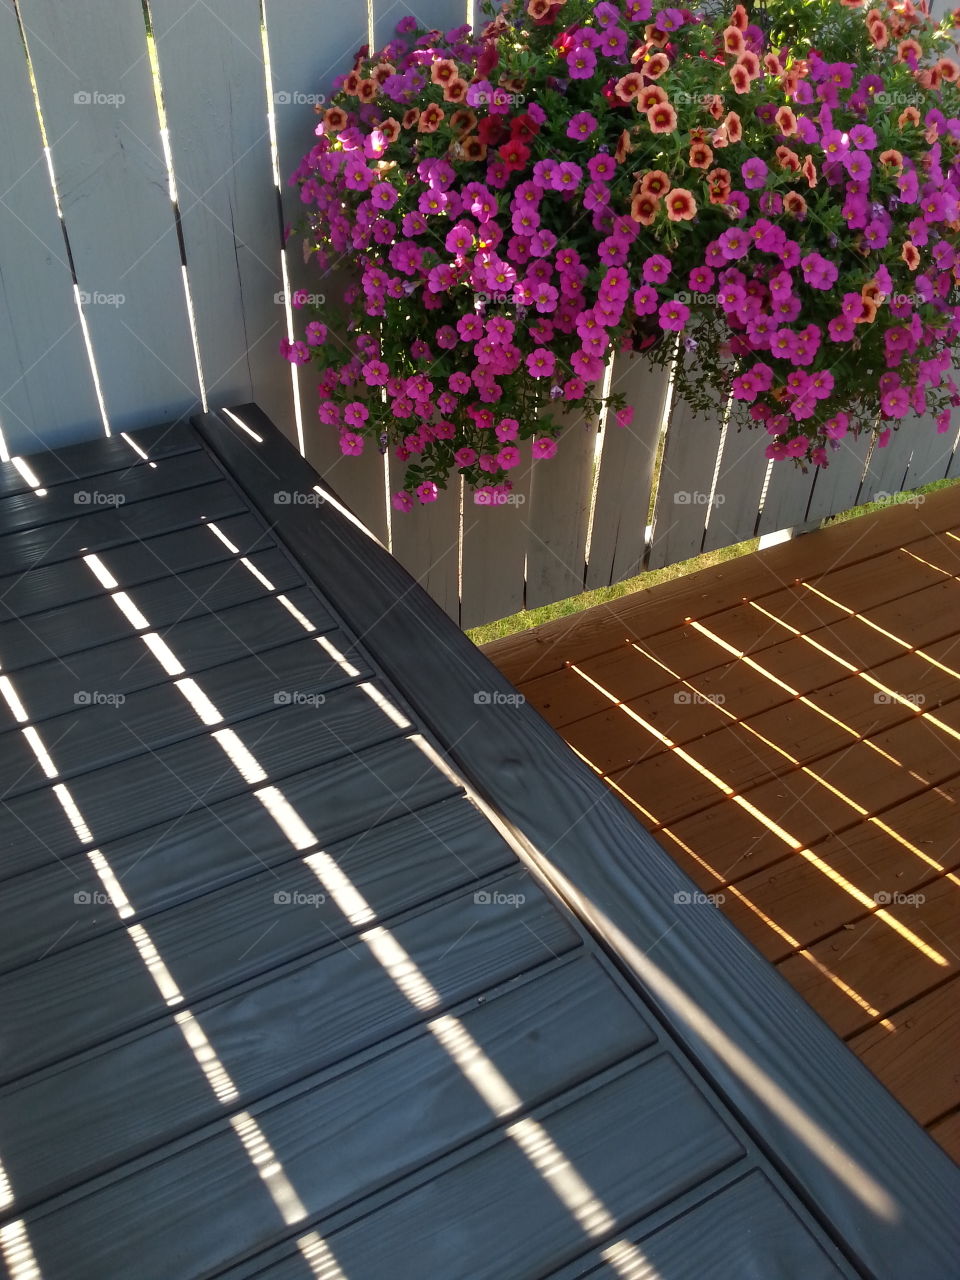 Linear Deck with Flowers